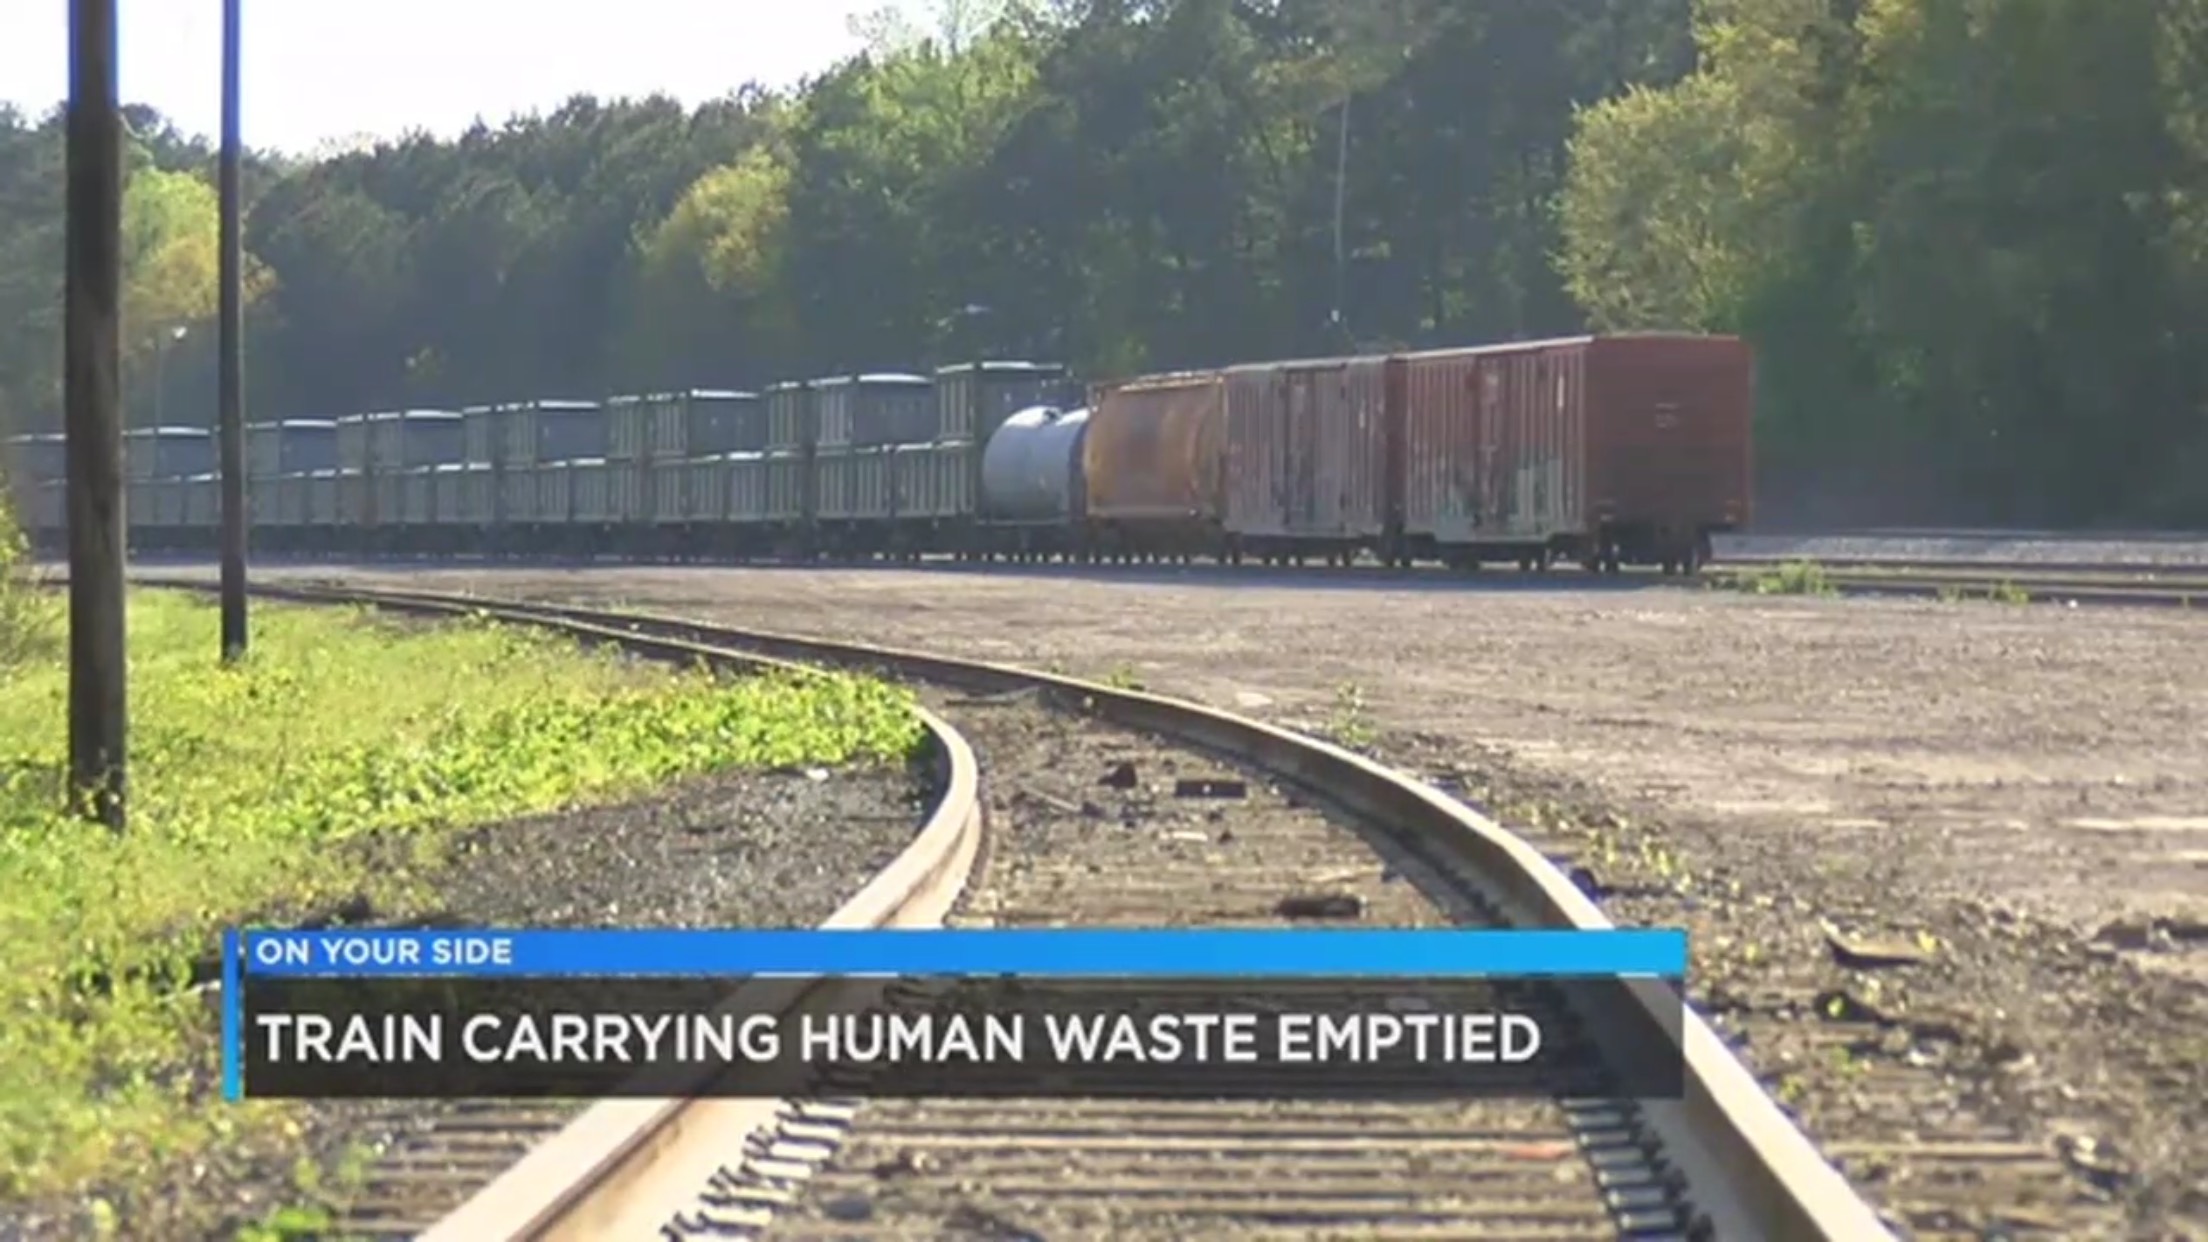 Train Carrying Human Waste Emptied